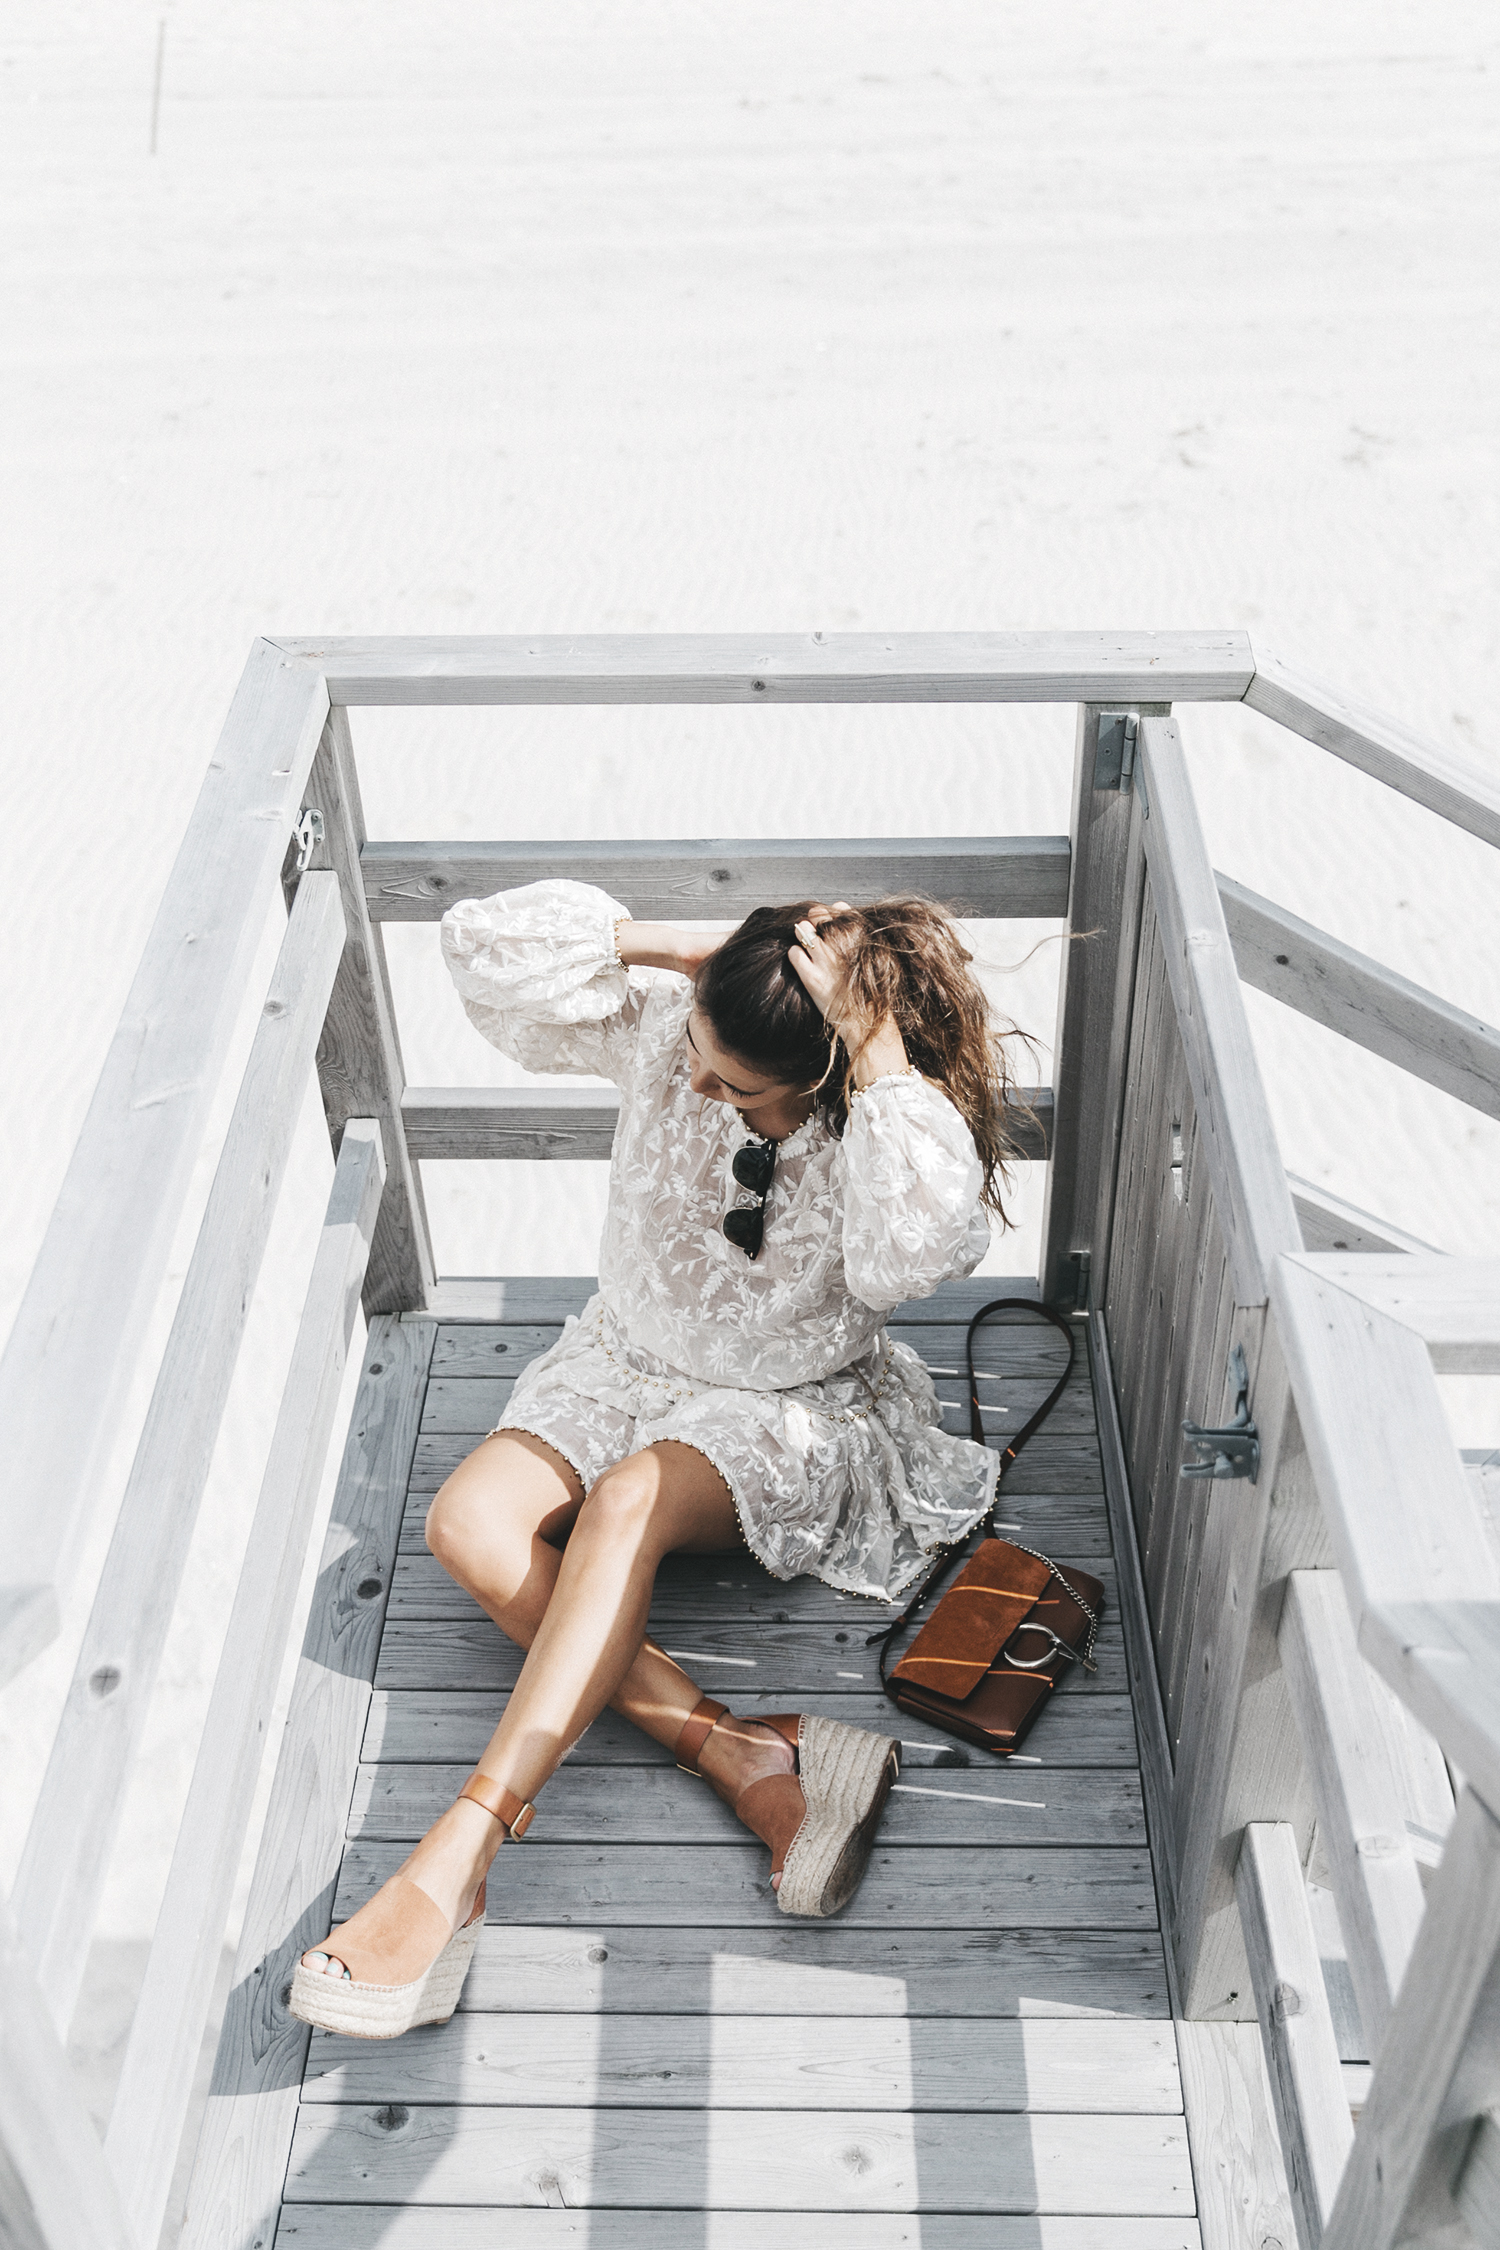 Revolve_in_The_Hamptons-Zimmermann-Embroidered_Dress-WHite_Dress-Chloe_Fay_Bag-Chloe_Wedges-Outfit-225